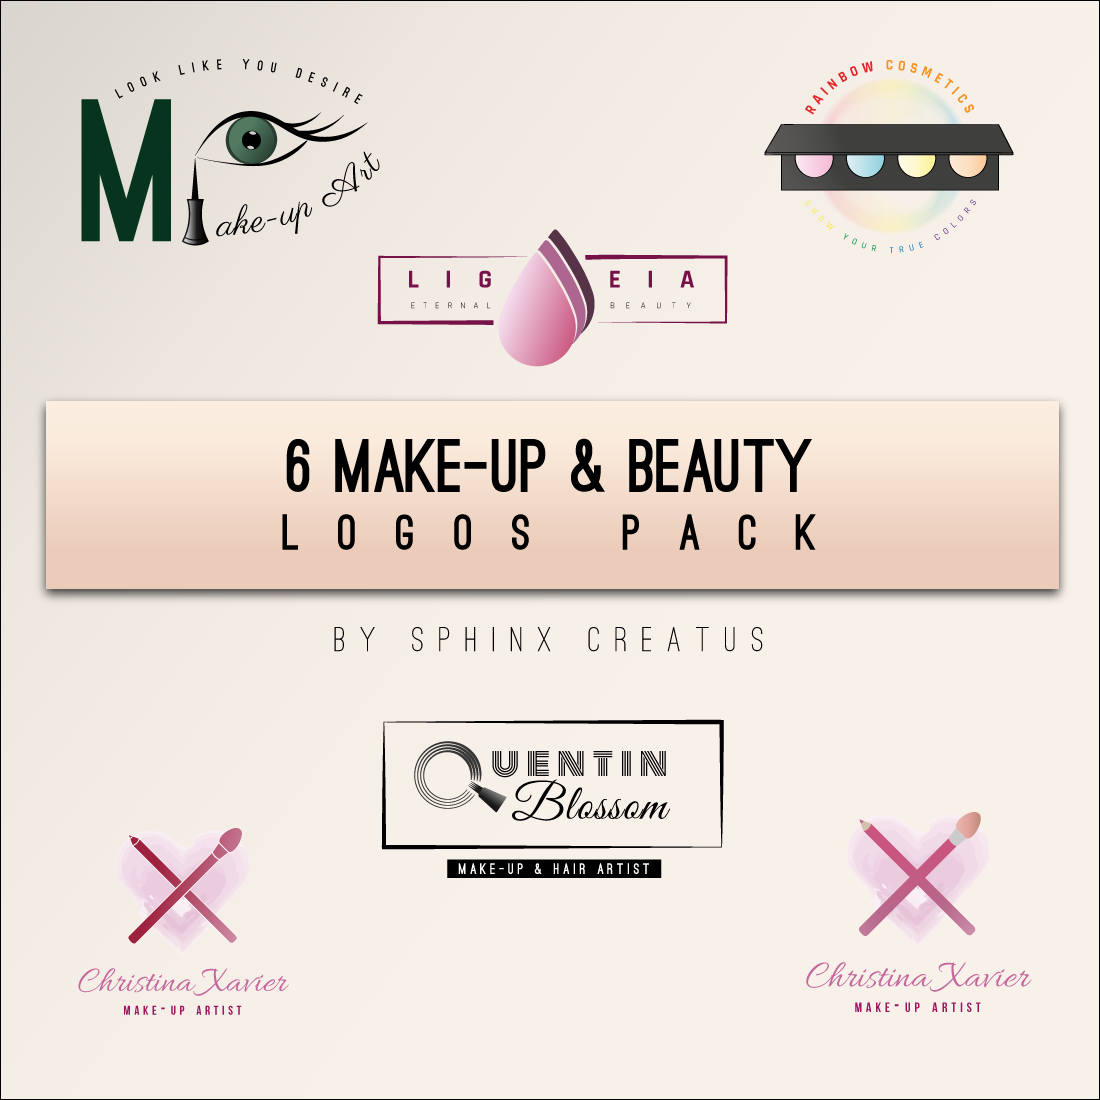 6 Make-up & Beauty Logos Pack [Sphinx Creatus] cover image.